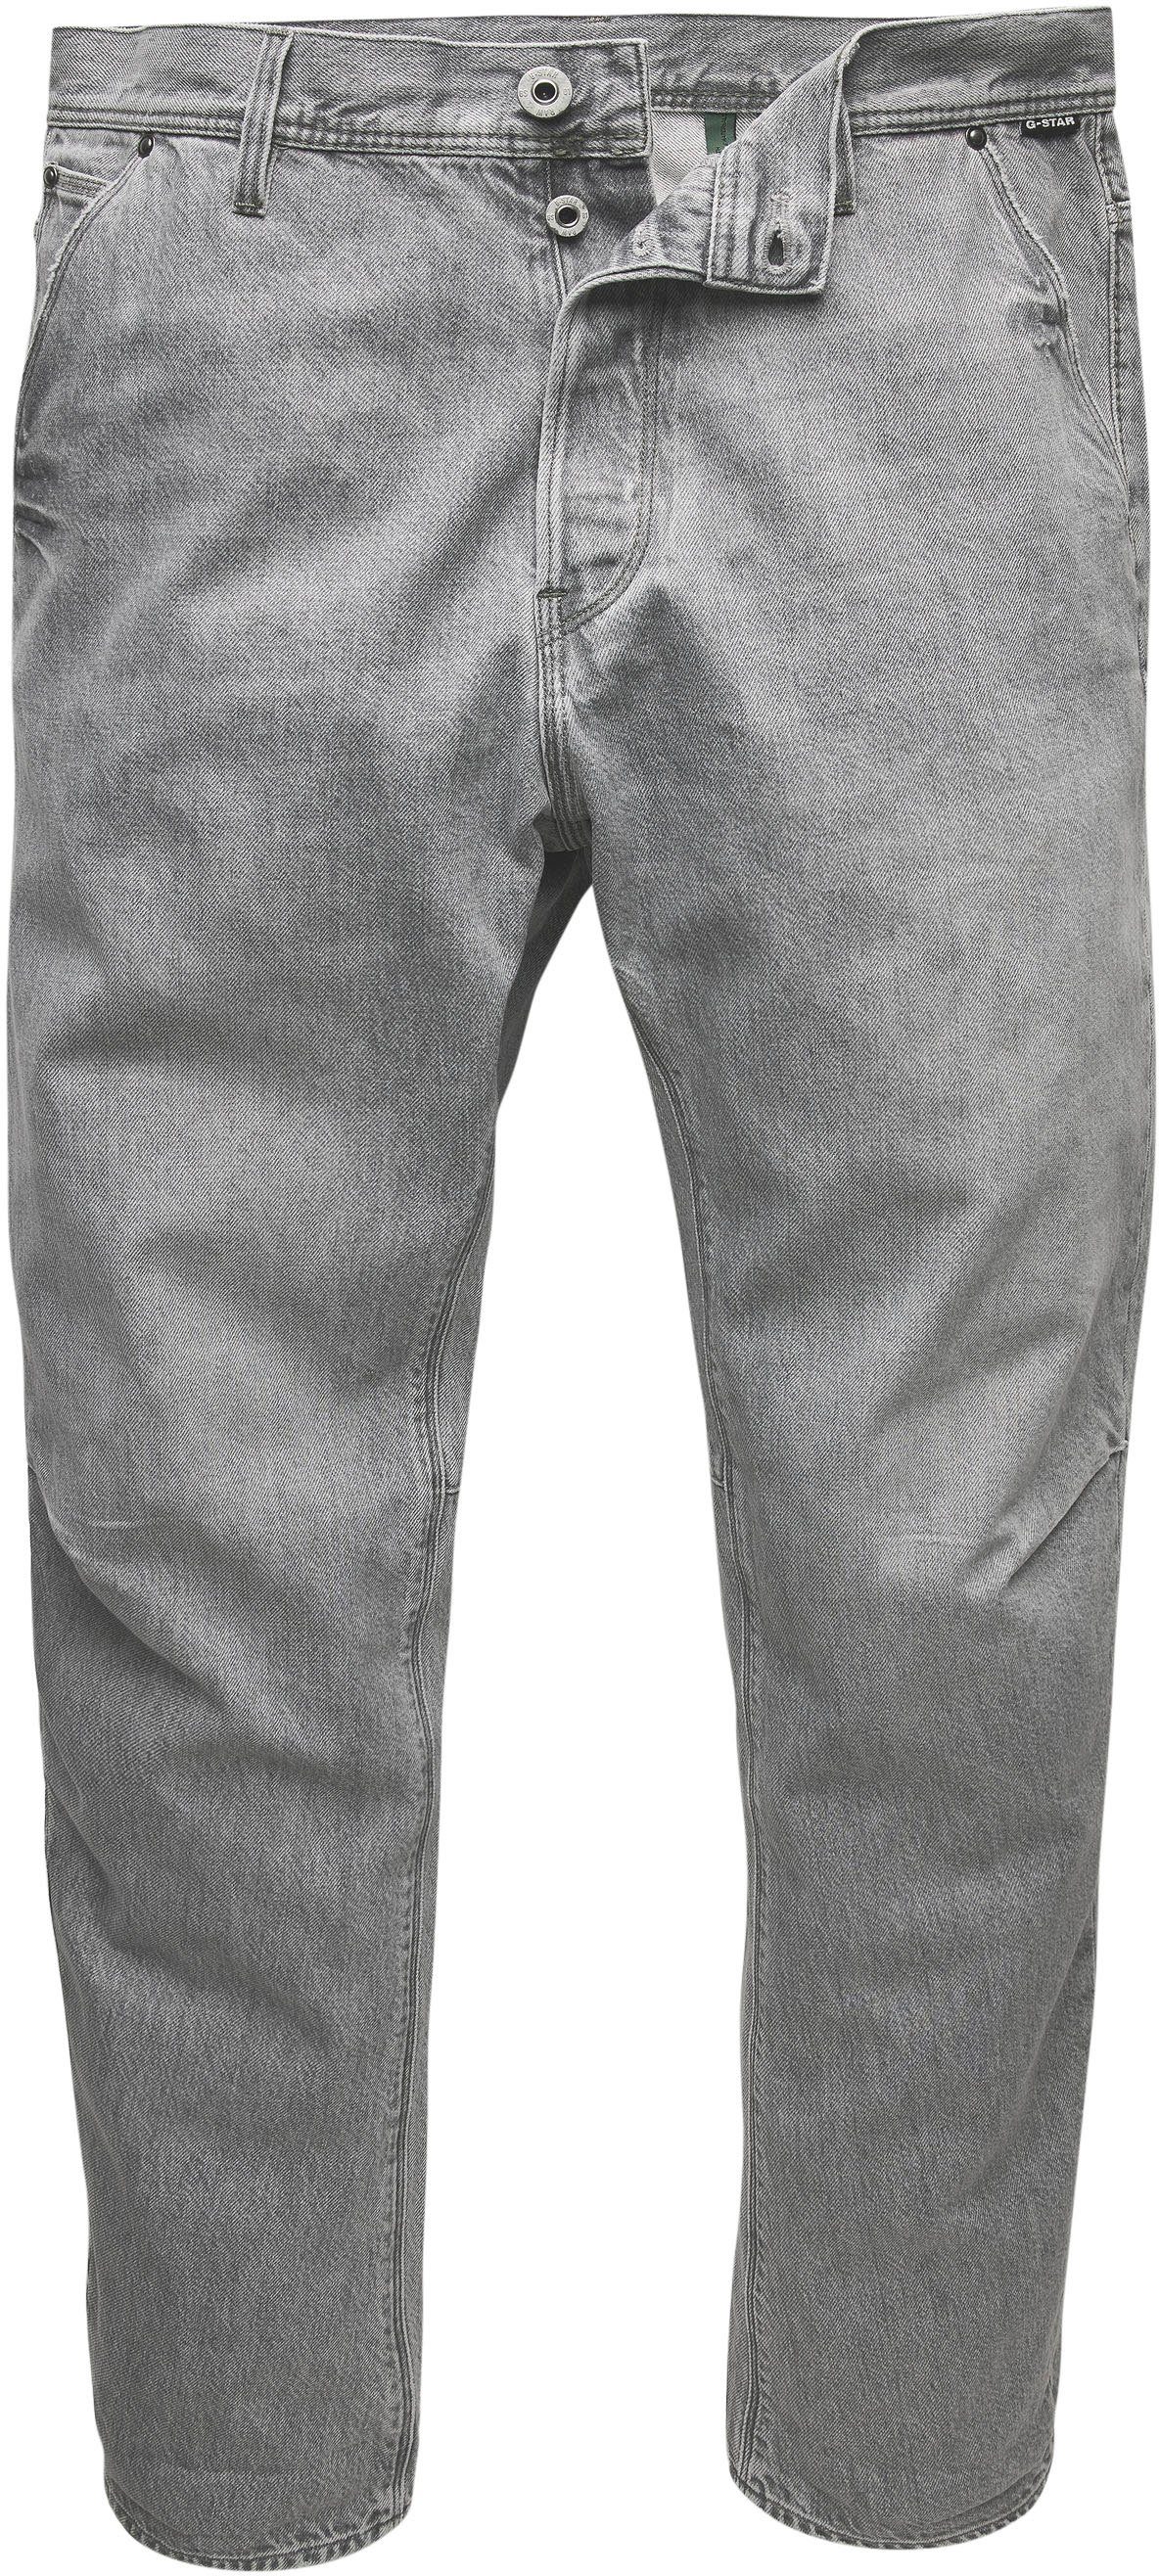 faded RAW G-Star Tapered Tapered-fit-Jeans grey Relaxed Grip 3d